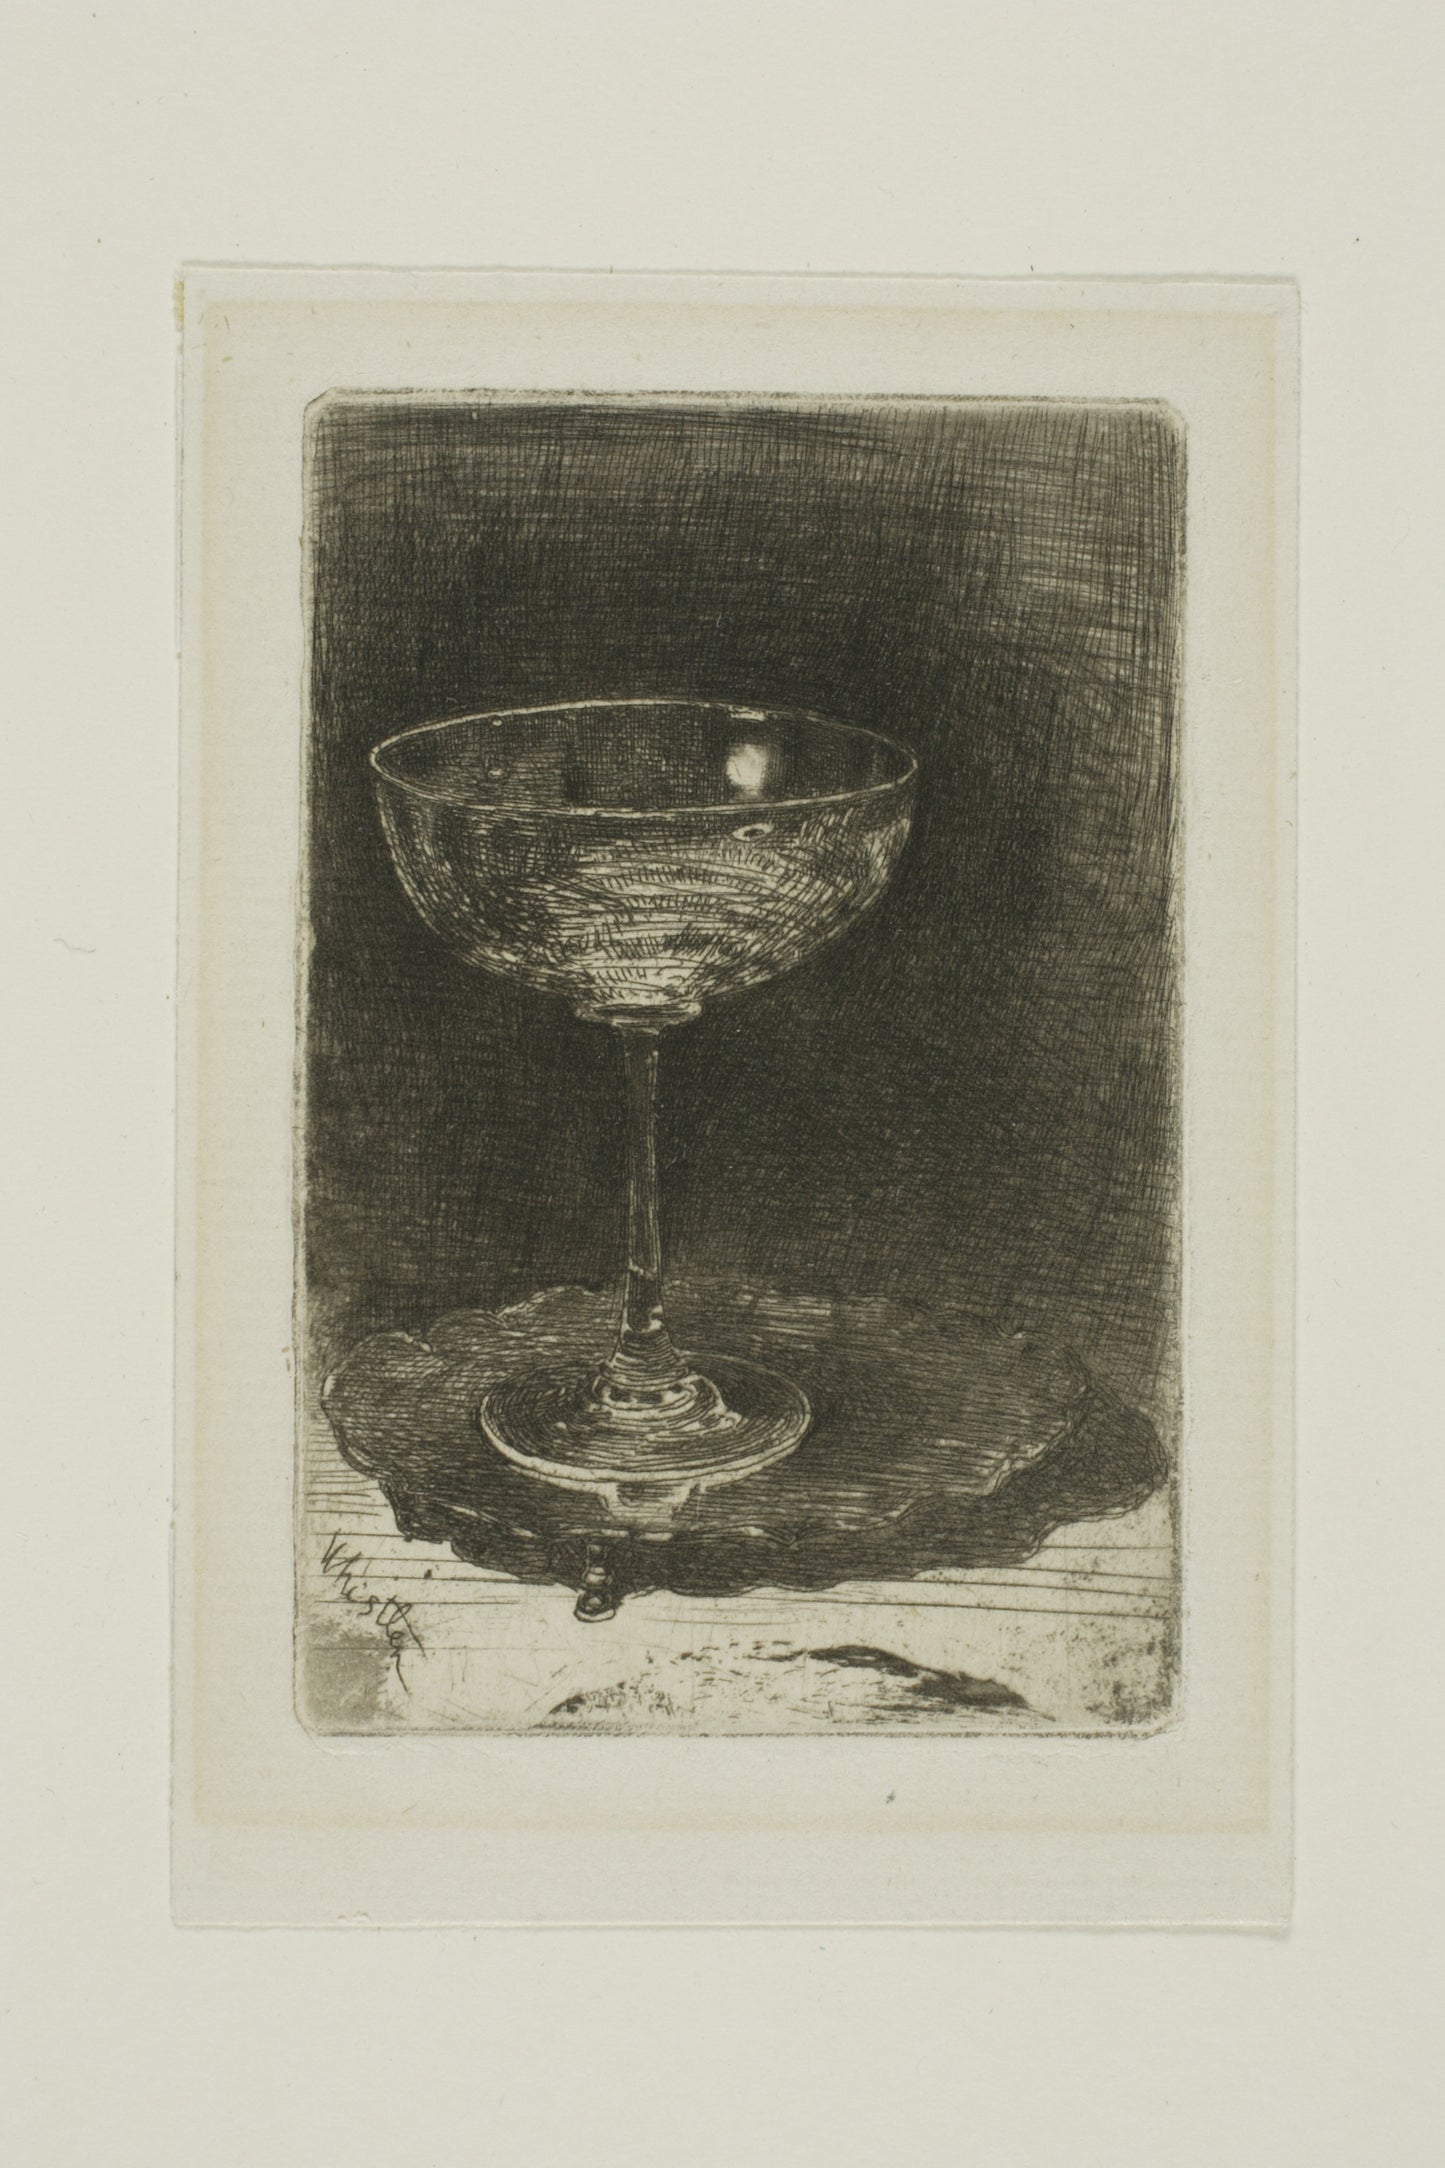 Glass (1800s) | James McNeill Whistler prints Posters, Prints, & Visual Artwork The Trumpet Shop   